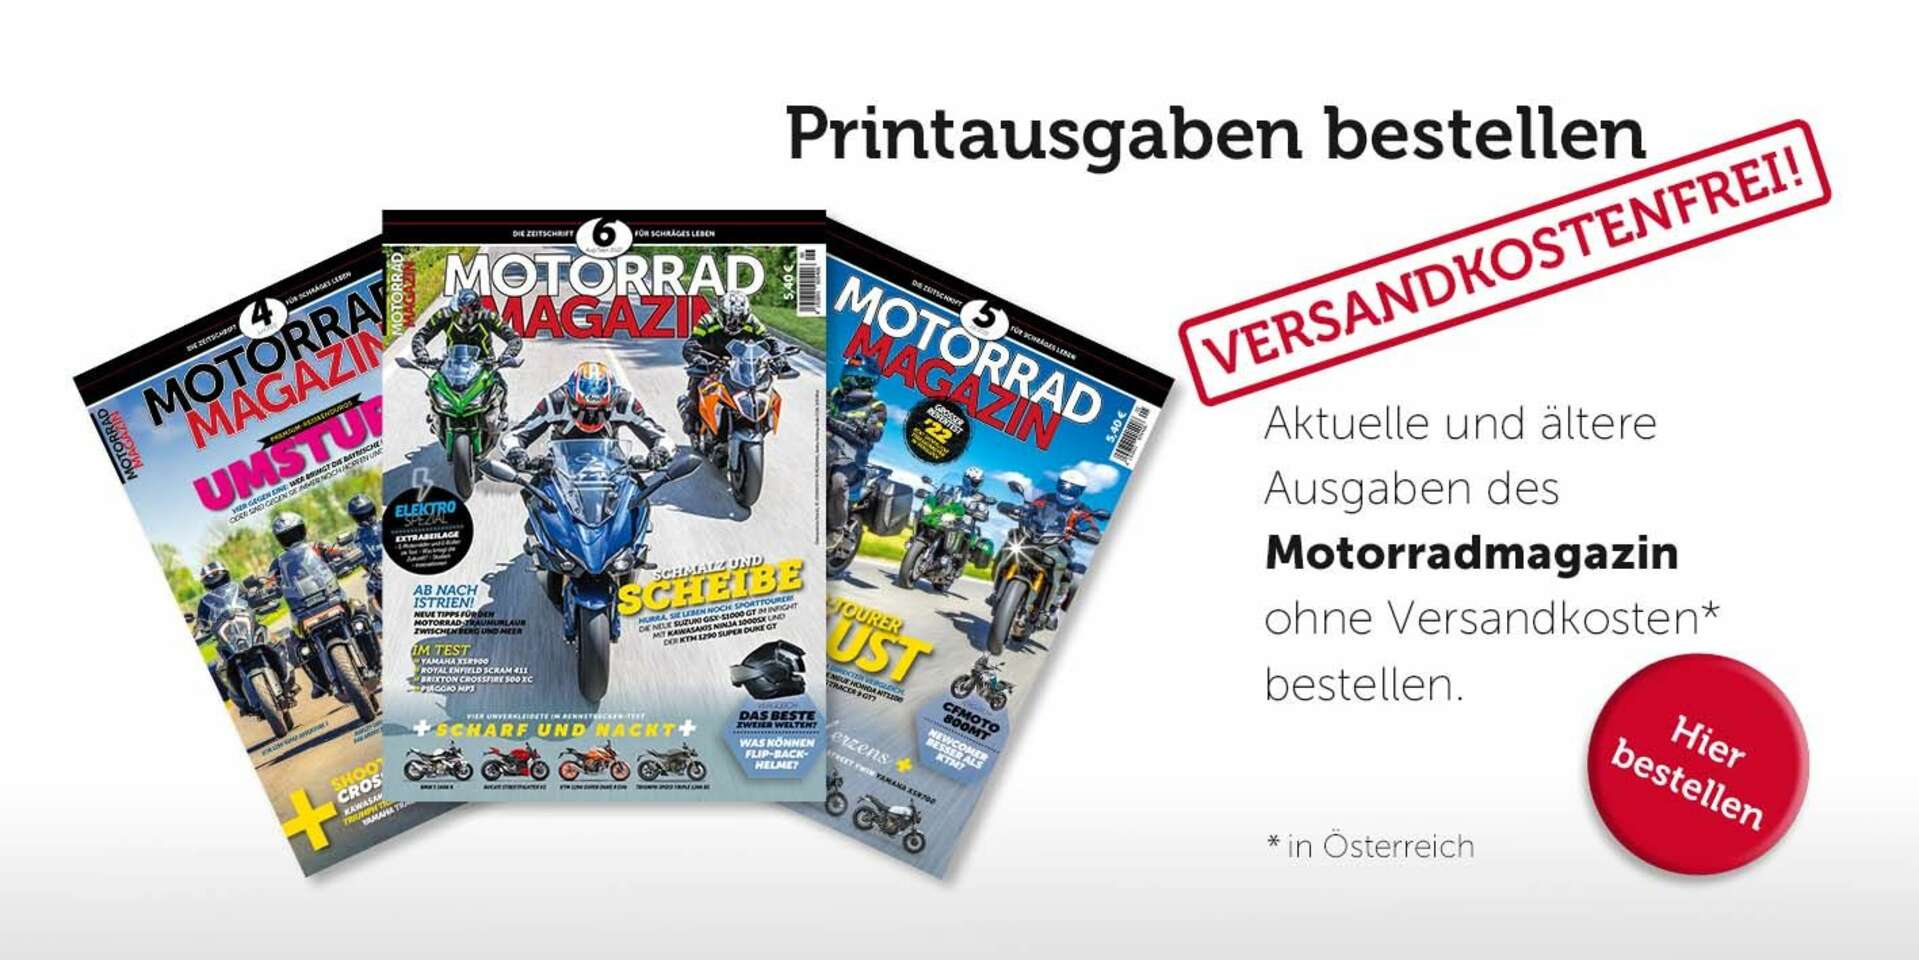 Order the print edition of Motorcycle Magazine